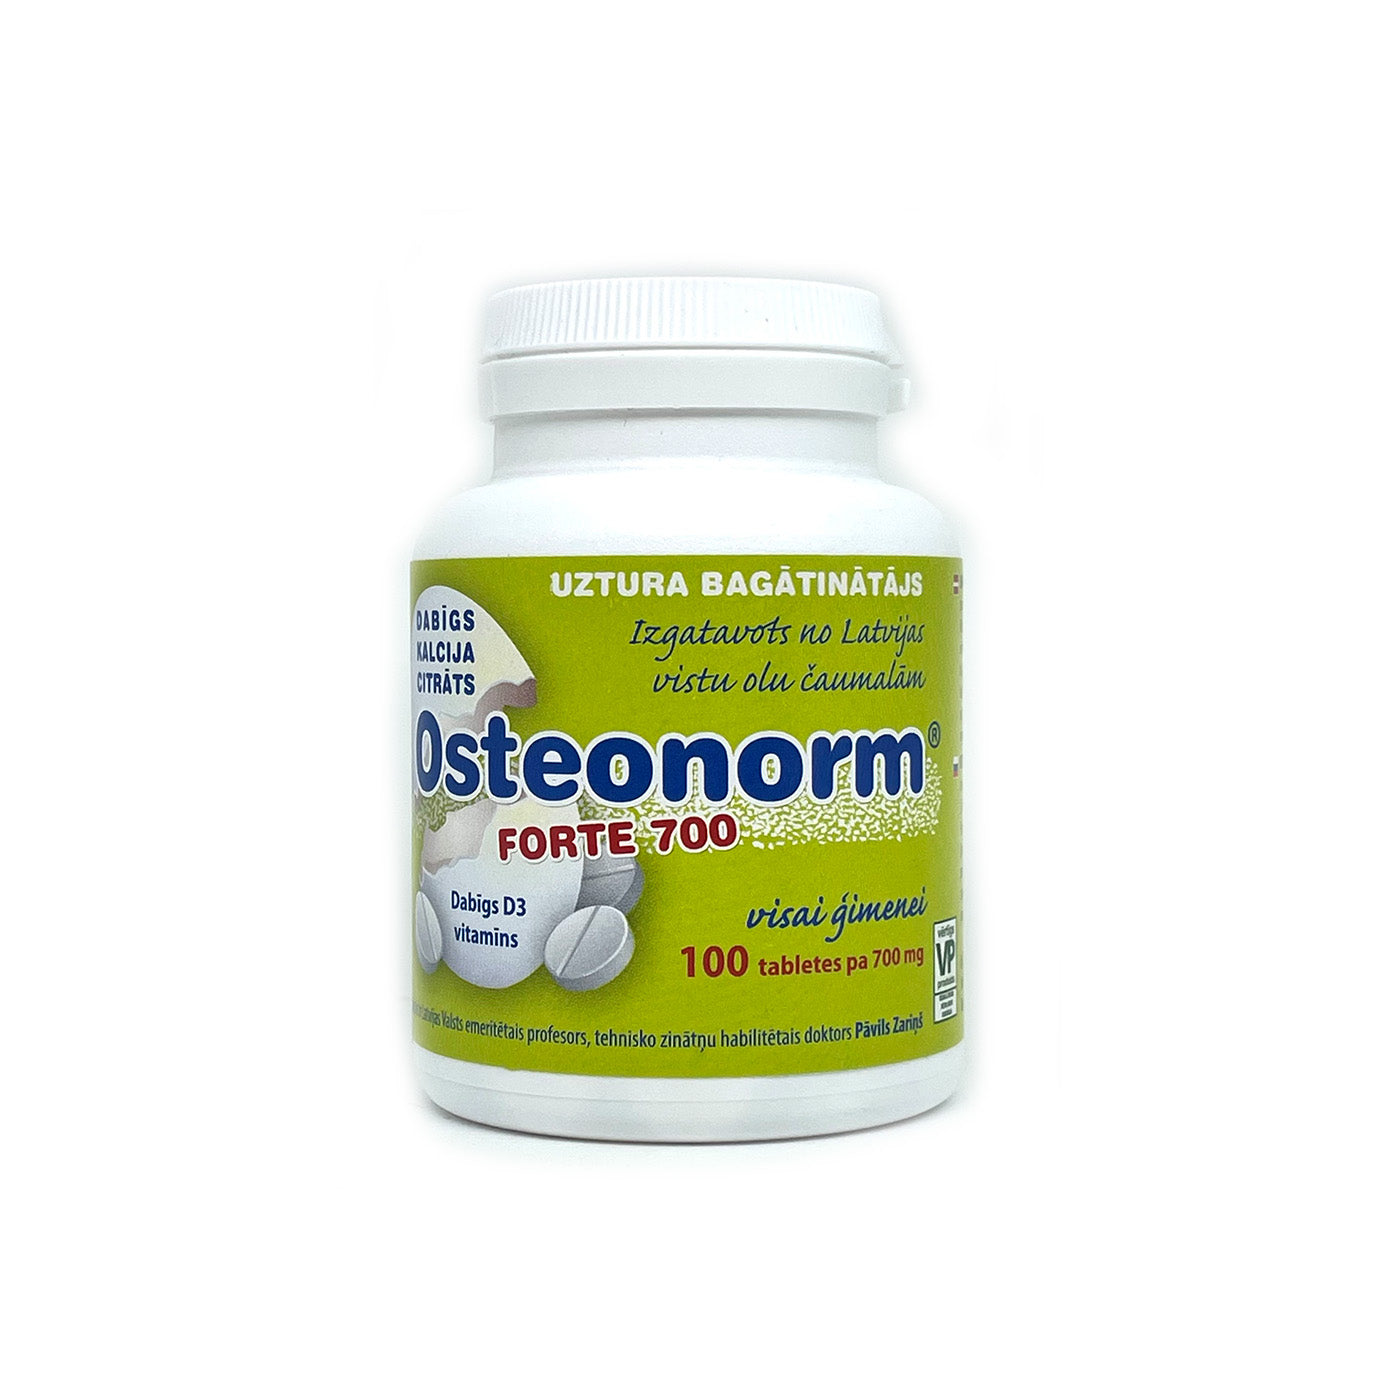 Osteonorm Forte 700 mg, 100 tablets